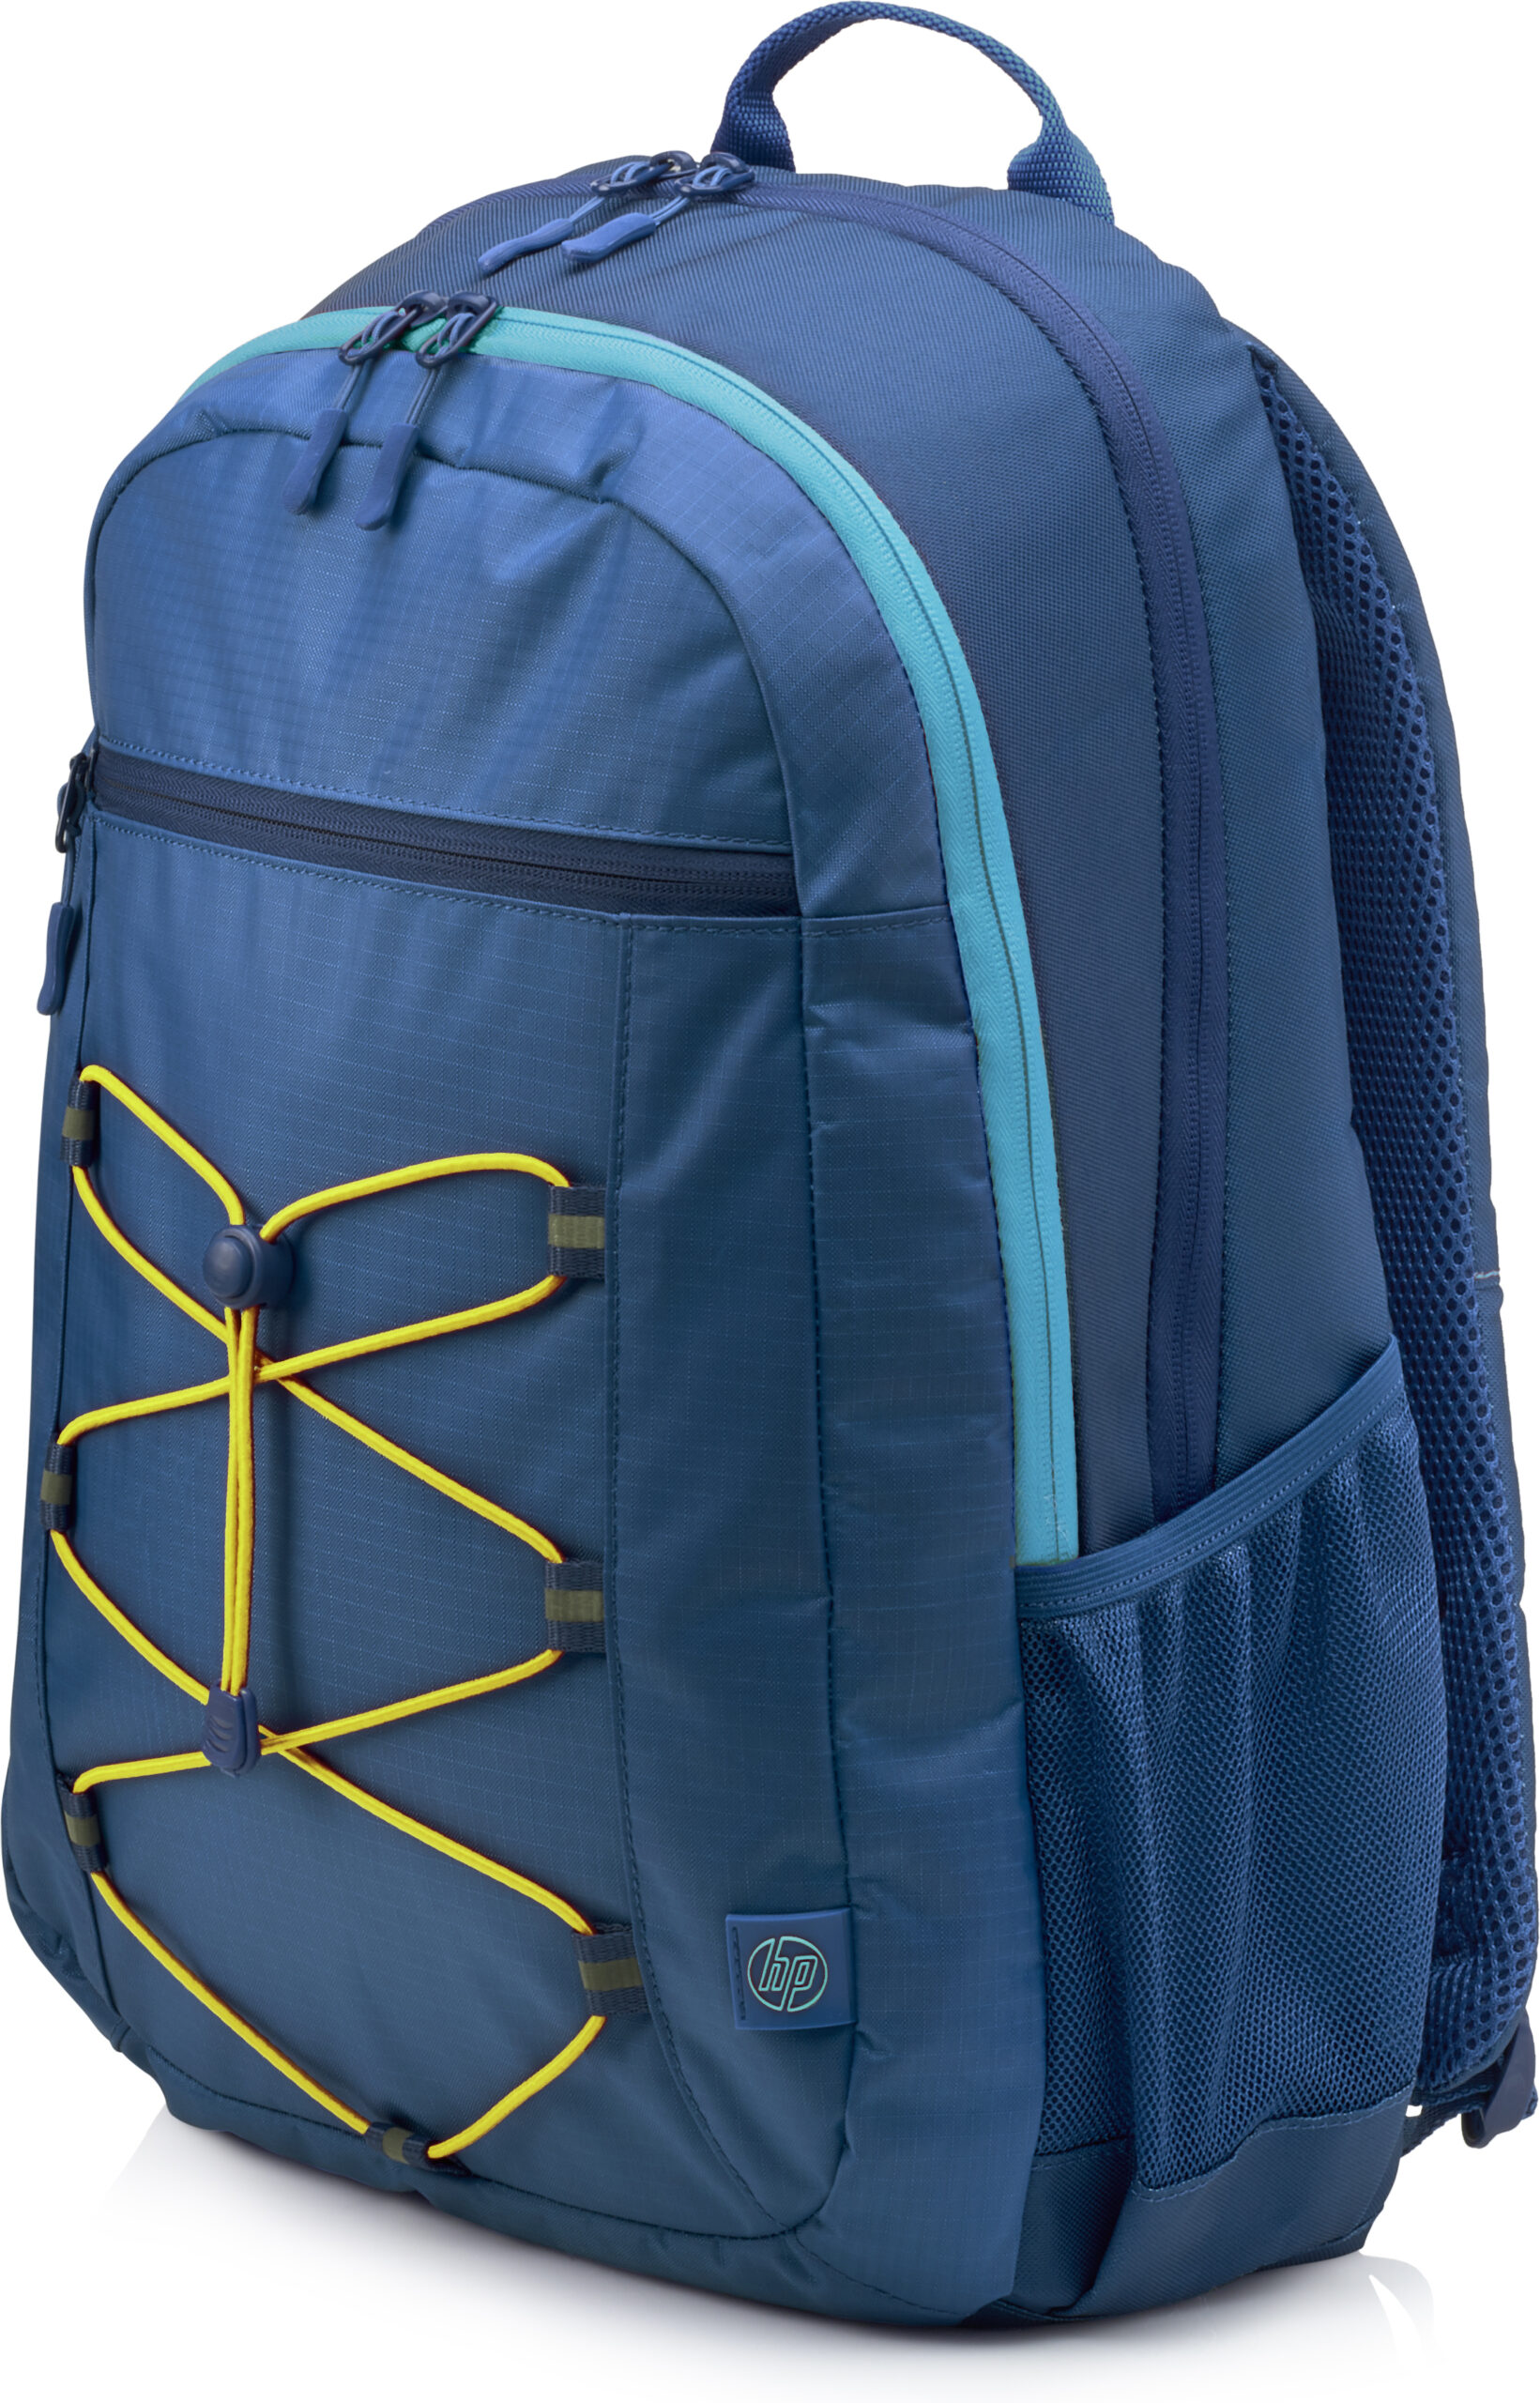 15 6active Blue Yellow Backpack Hp Cons Accs 9g 1lu24aa Abb 190781611936